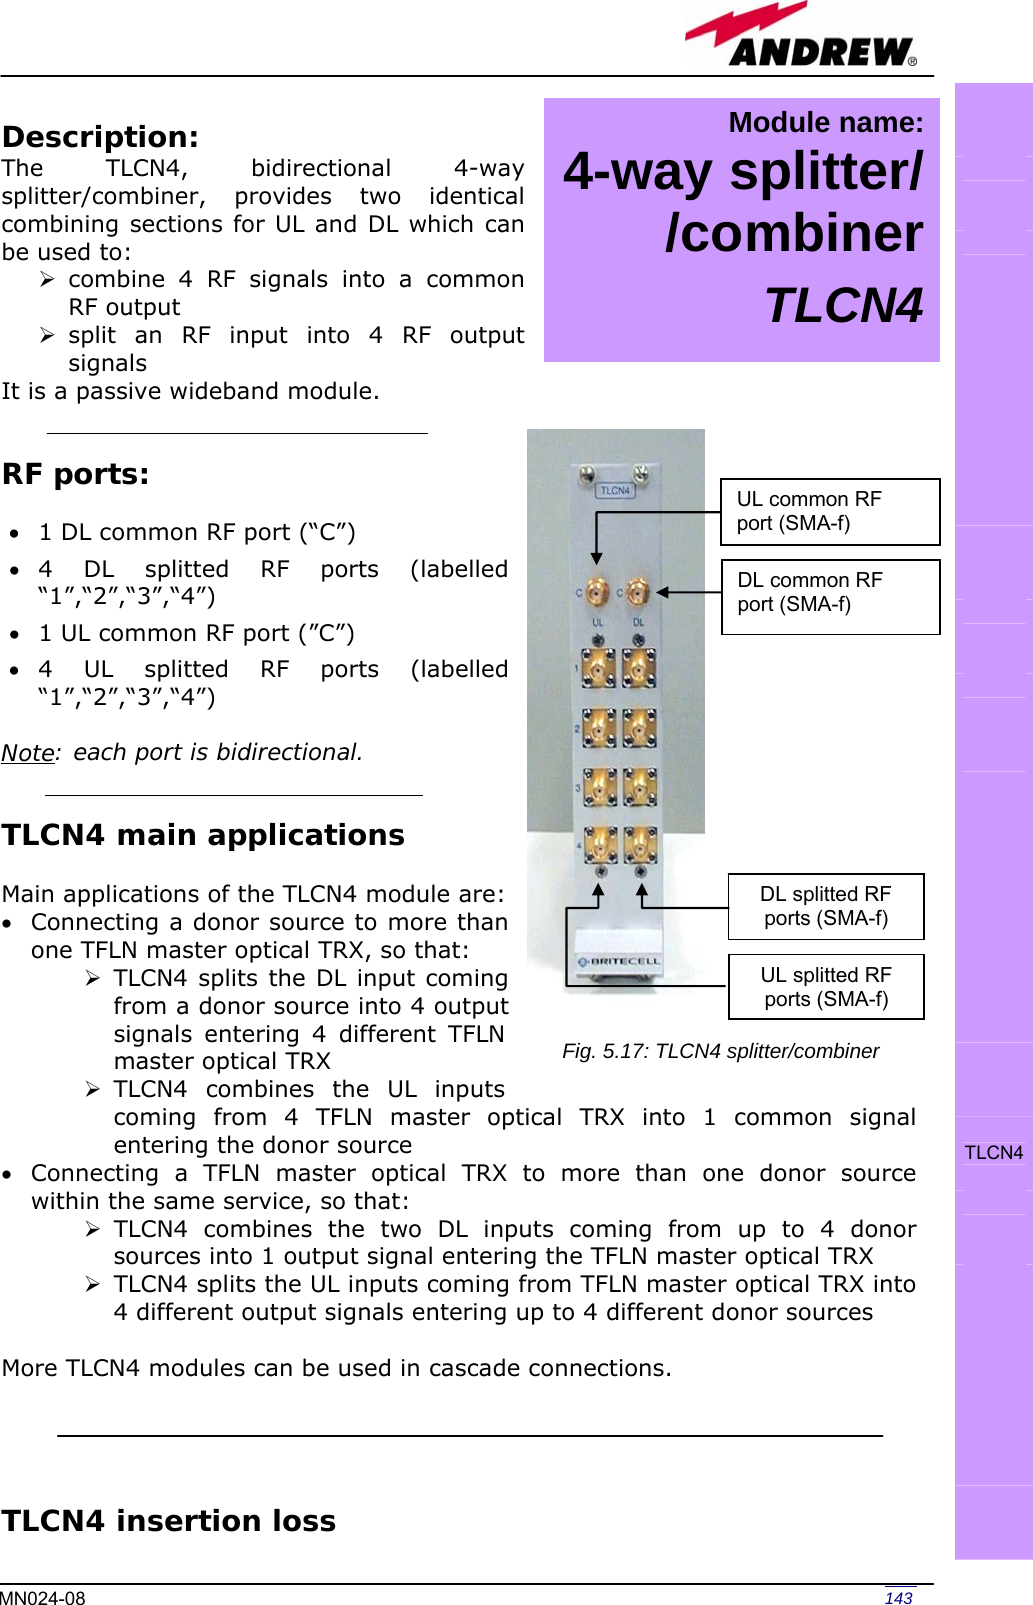   143MN024-08 Description: The TLCN4, bidirectional 4-way splitter/combiner, provides two identical combining sections for UL and DL which can be used to: ¾ combine 4 RF signals into a common RF output ¾ split an RF input into 4 RF output signals It is a passive wideband module.   RF ports:  • 1 DL common RF port (“C”)  • 4 DL splitted RF ports (labelled “1”,“2”,“3”,“4”) • 1 UL common RF port (”C”) • 4 UL splitted RF ports (labelled “1”,“2”,“3”,“4”)  Note: each port is bidirectional.   TLCN4 main applications  Main applications of the TLCN4 module are: • Connecting a donor source to more than one TFLN master optical TRX, so that: ¾ TLCN4 splits the DL input coming from a donor source into 4 output signals entering 4 different TFLN master optical TRX ¾ TLCN4 combines the UL inputs coming from 4 TFLN master optical TRX into 1 common signal entering the donor source • Connecting a TFLN master optical TRX to more than one donor source within the same service, so that: ¾ TLCN4 combines the two DL inputs coming from up to 4 donor sources into 1 output signal entering the TFLN master optical TRX ¾ TLCN4 splits the UL inputs coming from TFLN master optical TRX into 4 different output signals entering up to 4 different donor sources  More TLCN4 modules can be used in cascade connections.     TLCN4 insertion loss                TLCN4     UL splitted RF ports (SMA-f)DL splitted RF ports (SMA-f) UL common RF port (SMA-f) DL common RF port (SMA-f) Fig. 5.17: TLCN4 splitter/combiner Module name: 4-way splitter/ /combinerTLCN4